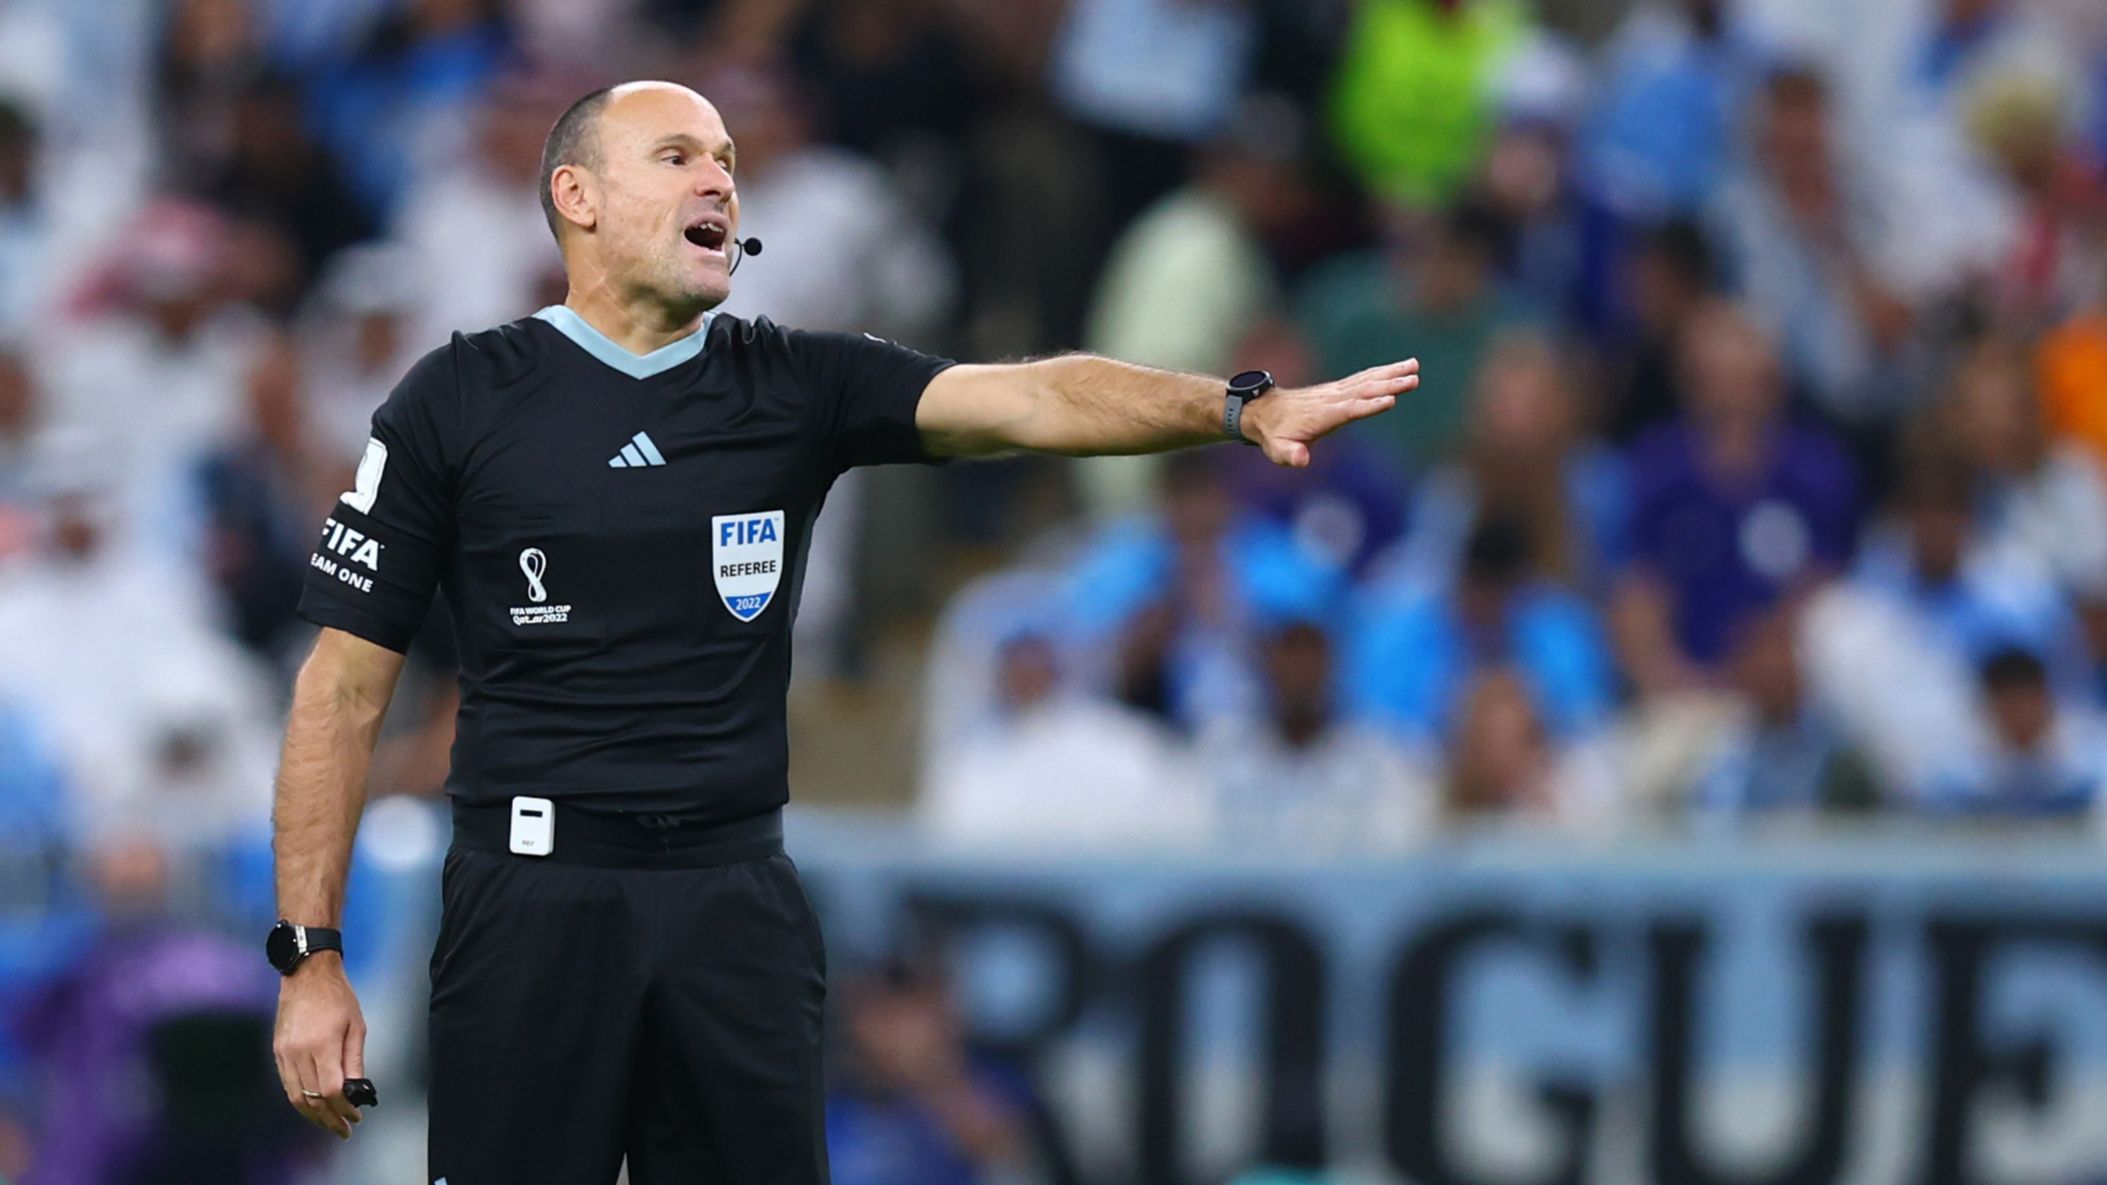 The Spanish referee Mateu Lahoz, goal of the fury of Messi and the Argentines within the World Cup